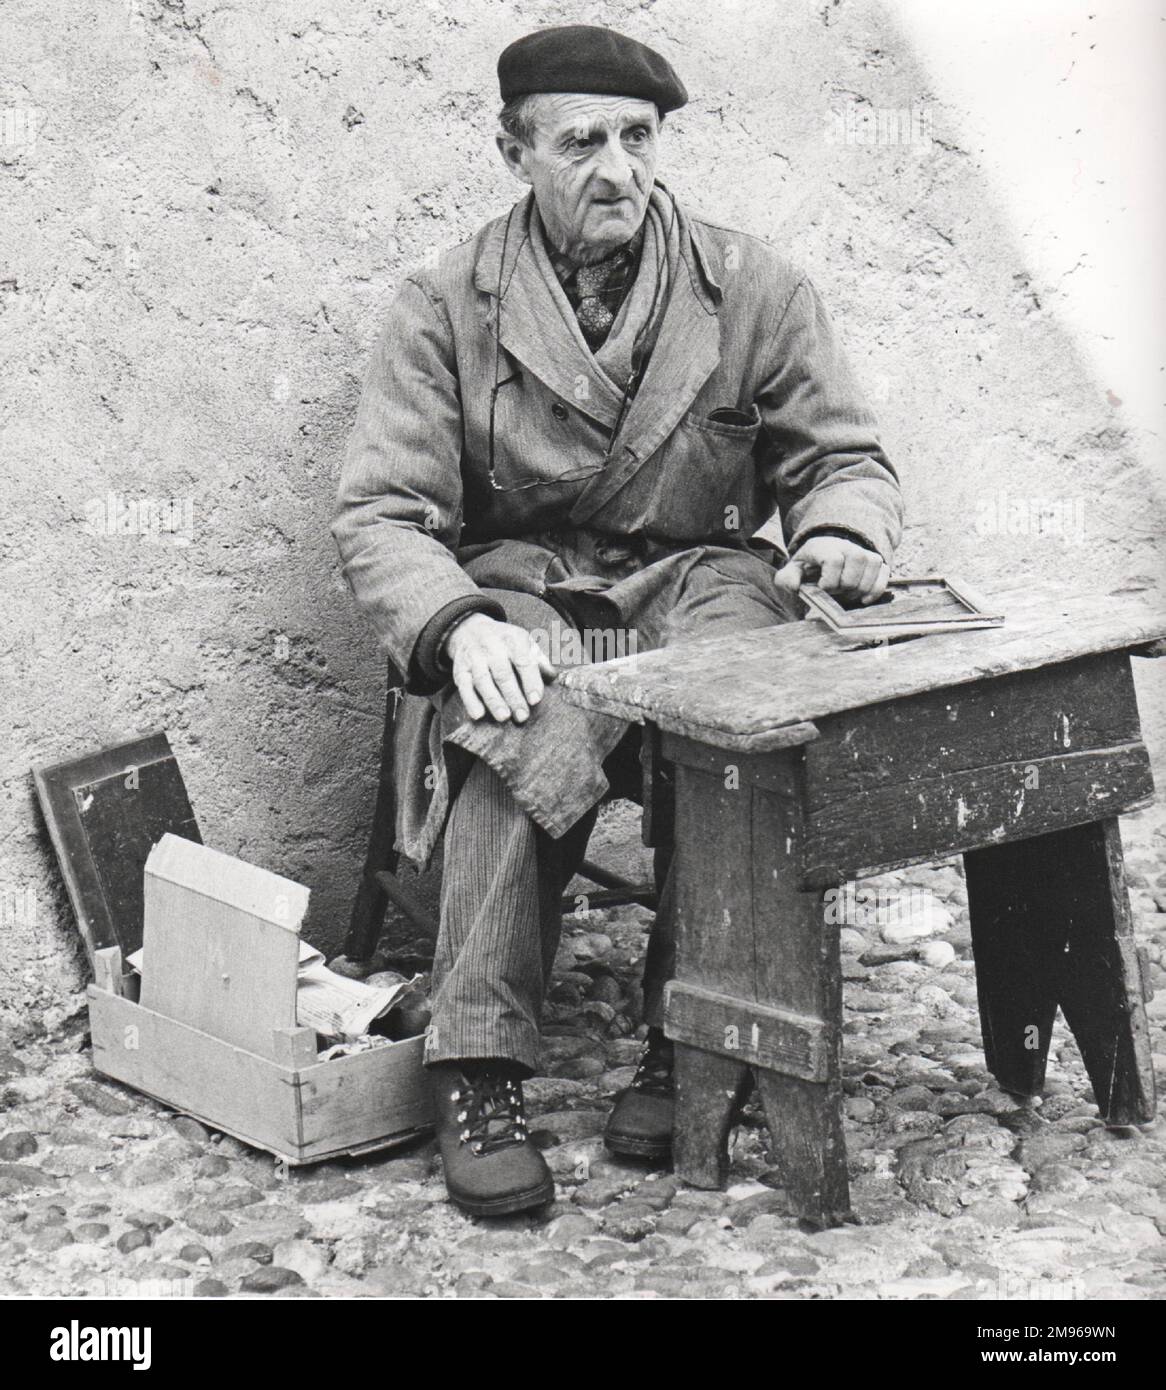 An old man (possibly Spanish) working on the street.  He wears a scruffy overcoat, a beret, and his glasses on a string round his neck.  He has a small wooden work bench and a box of materials.  Perhaps he is a picture framer. Stock Photo